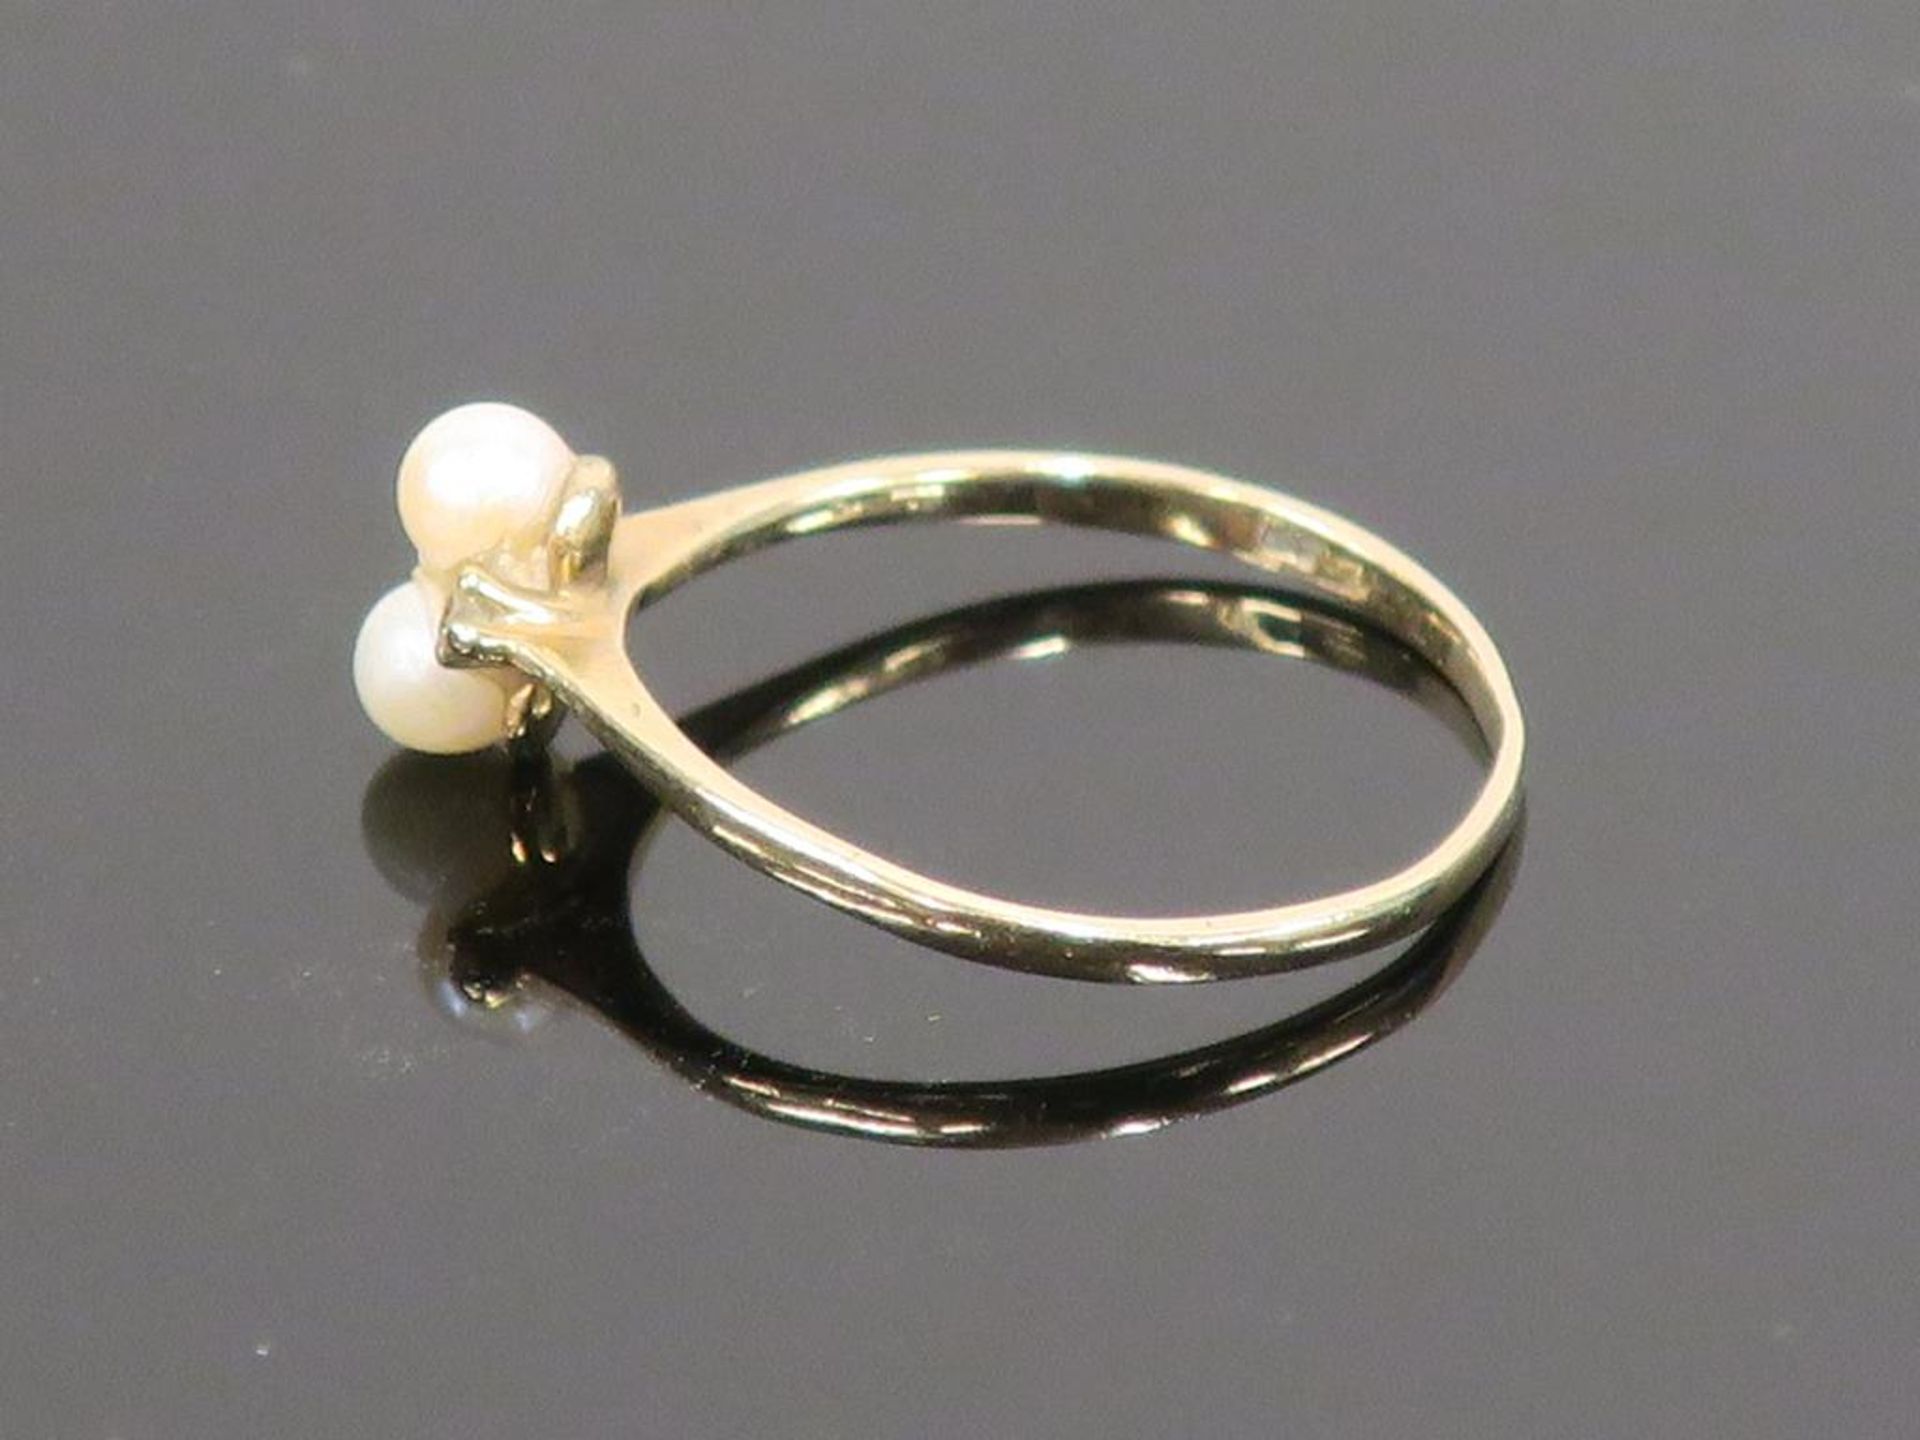 A 9ct Gold Diamond and Pearl Ring (size N 1/2) (est £40-£80) - Image 3 of 3